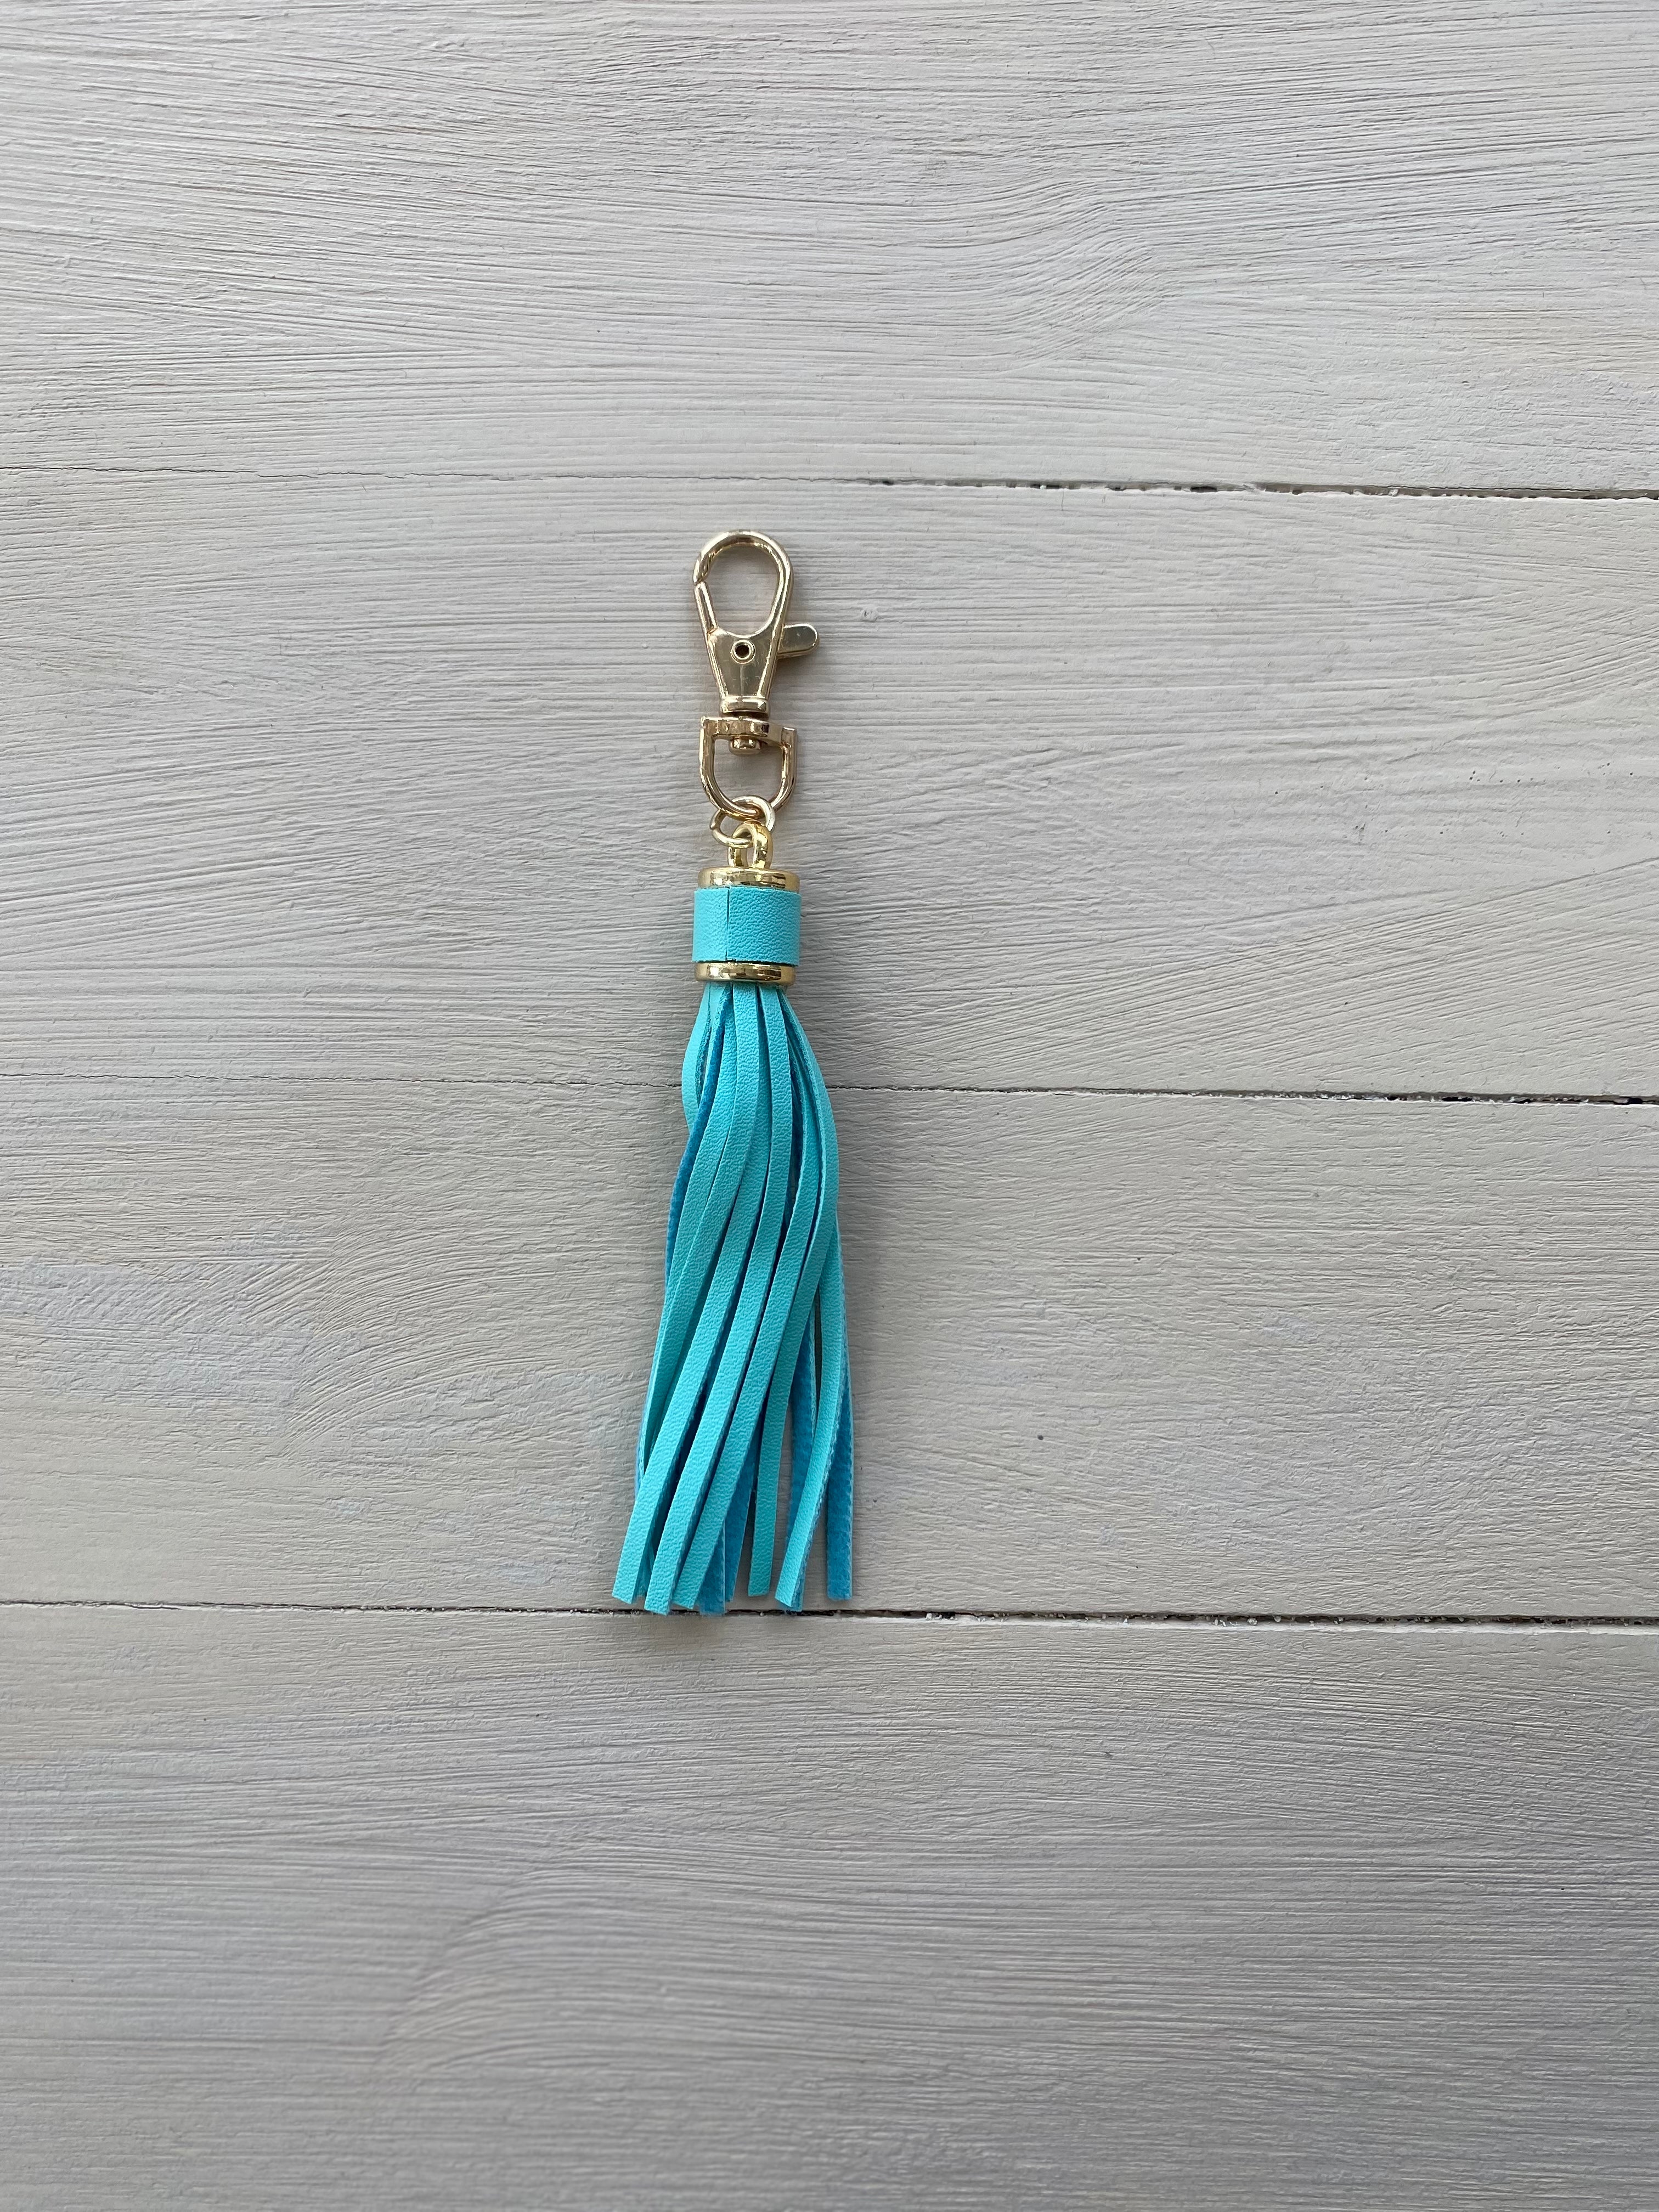 SVF Turquoise Faux Leather Tassel and Motivational Engraved Acrylic Charm of choice! The Mustard Seed Collection, The Seed